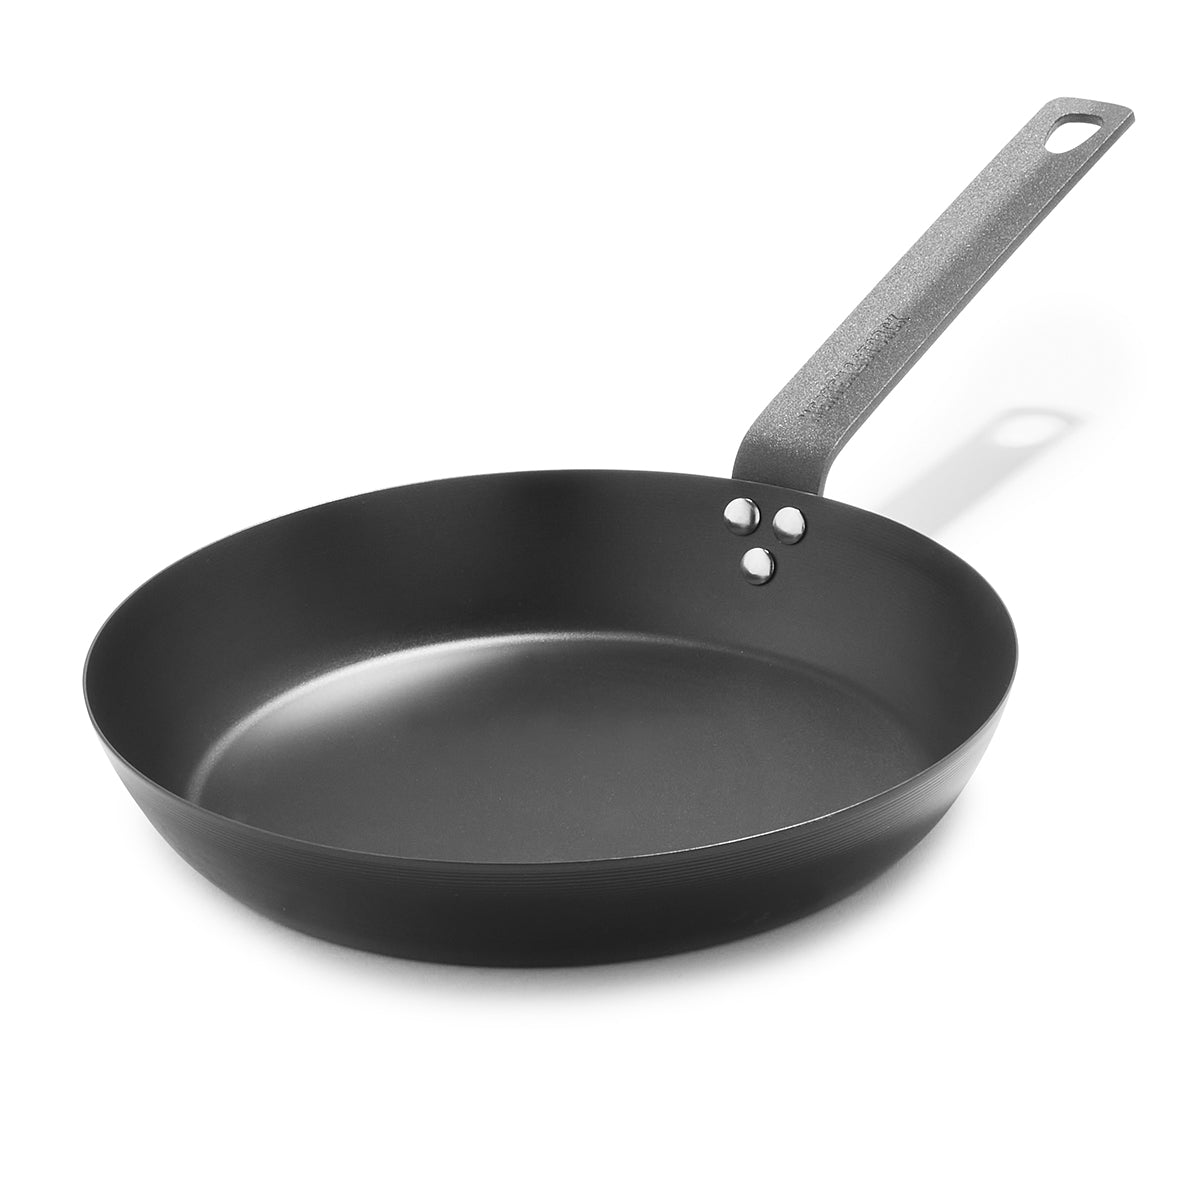 Carbon Steel 8 inch Frypan on a white background.